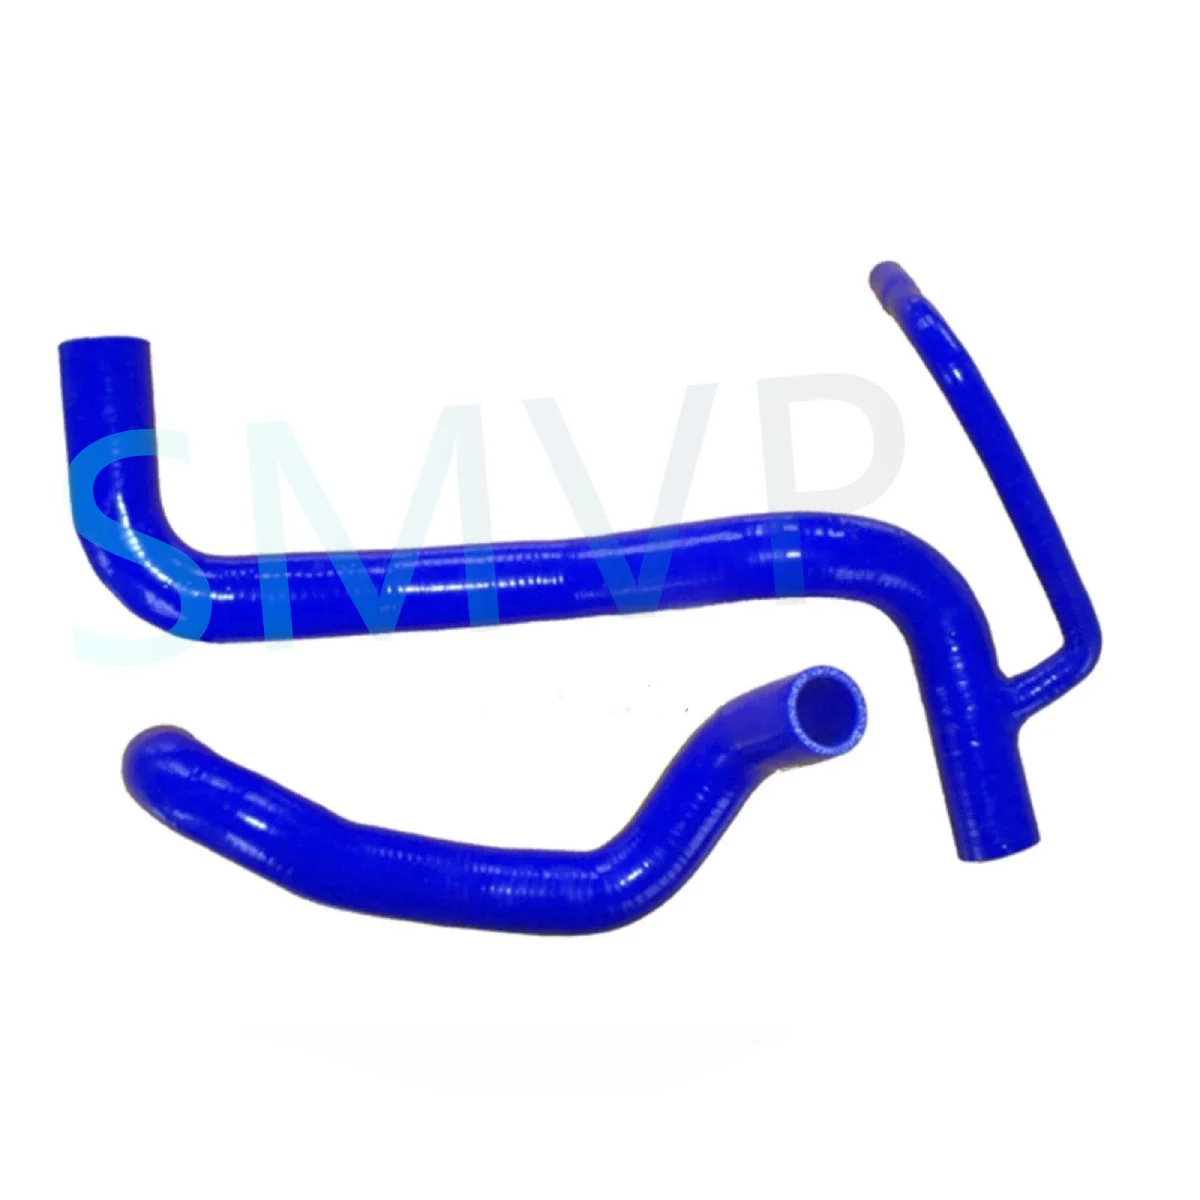 

2PCS Silicone Radiator Hose For 2008-2011 TOYOTA SCION XB T2B 1NZ/2ZR/2AZ 3-ply Replacement Performance Parts 2009 2010